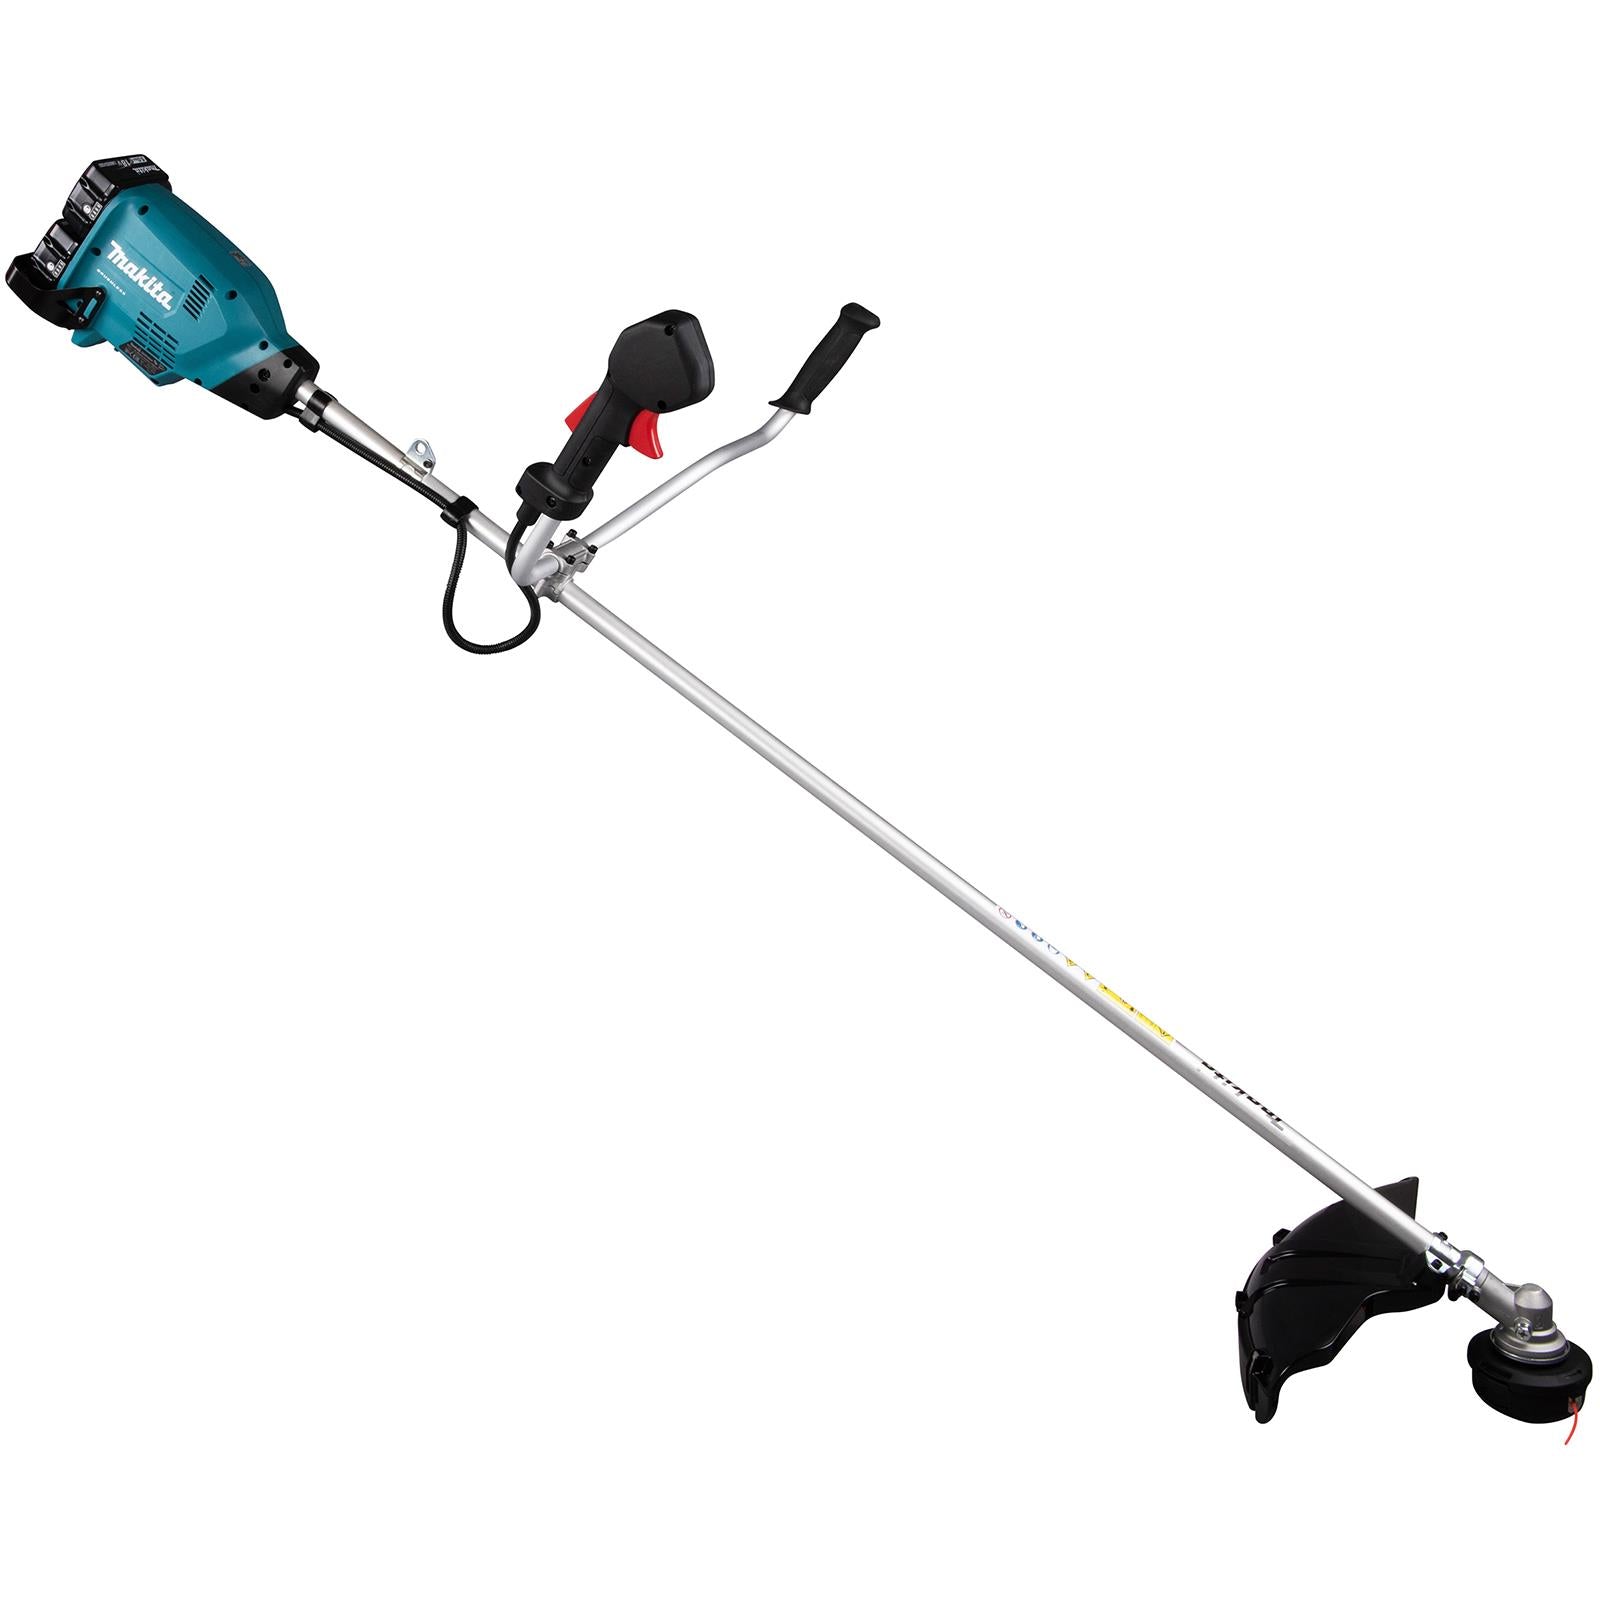 Makita Brush Cutter Kit 2 x 18V LXT Brushless Cordless Garden Lawn Strimming 2 x 6Ah Battery and Dual Rapid Charger DUR369APG2